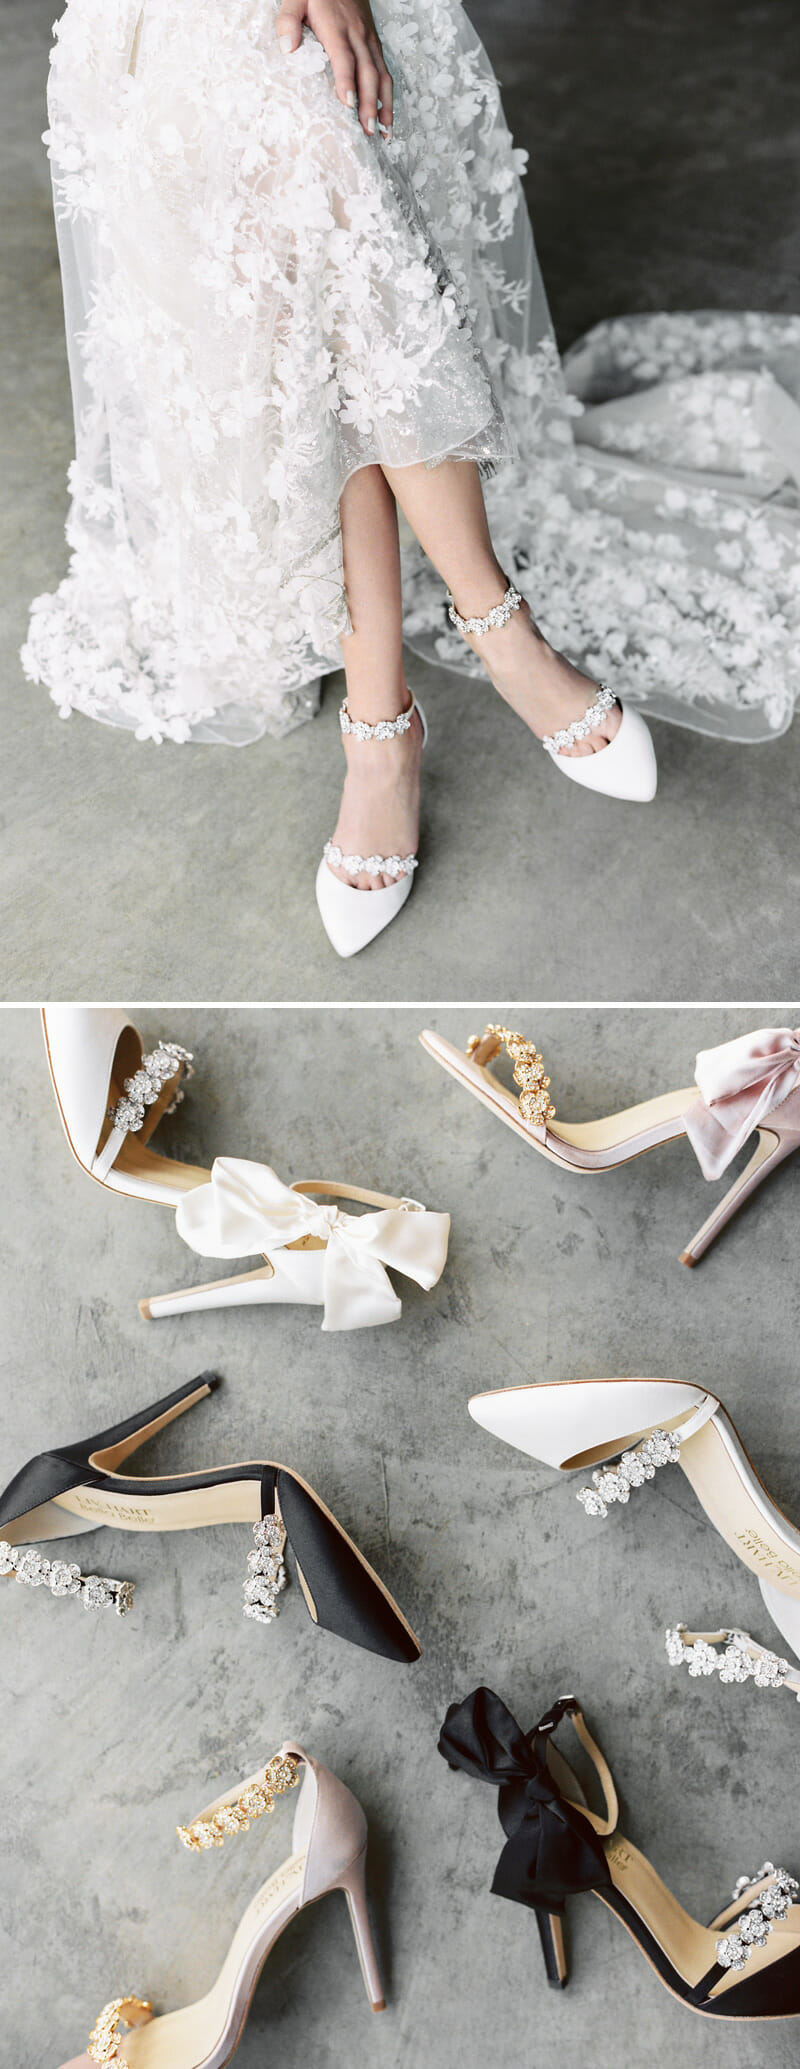 Liv Hart for Bella Belle, Bridal Shoes, Chic Shoes, Bridal Heels, Handmade Shoes, Perfect Wedding Magazine, Perfect Wedding Blog, Bridal Fashion, 